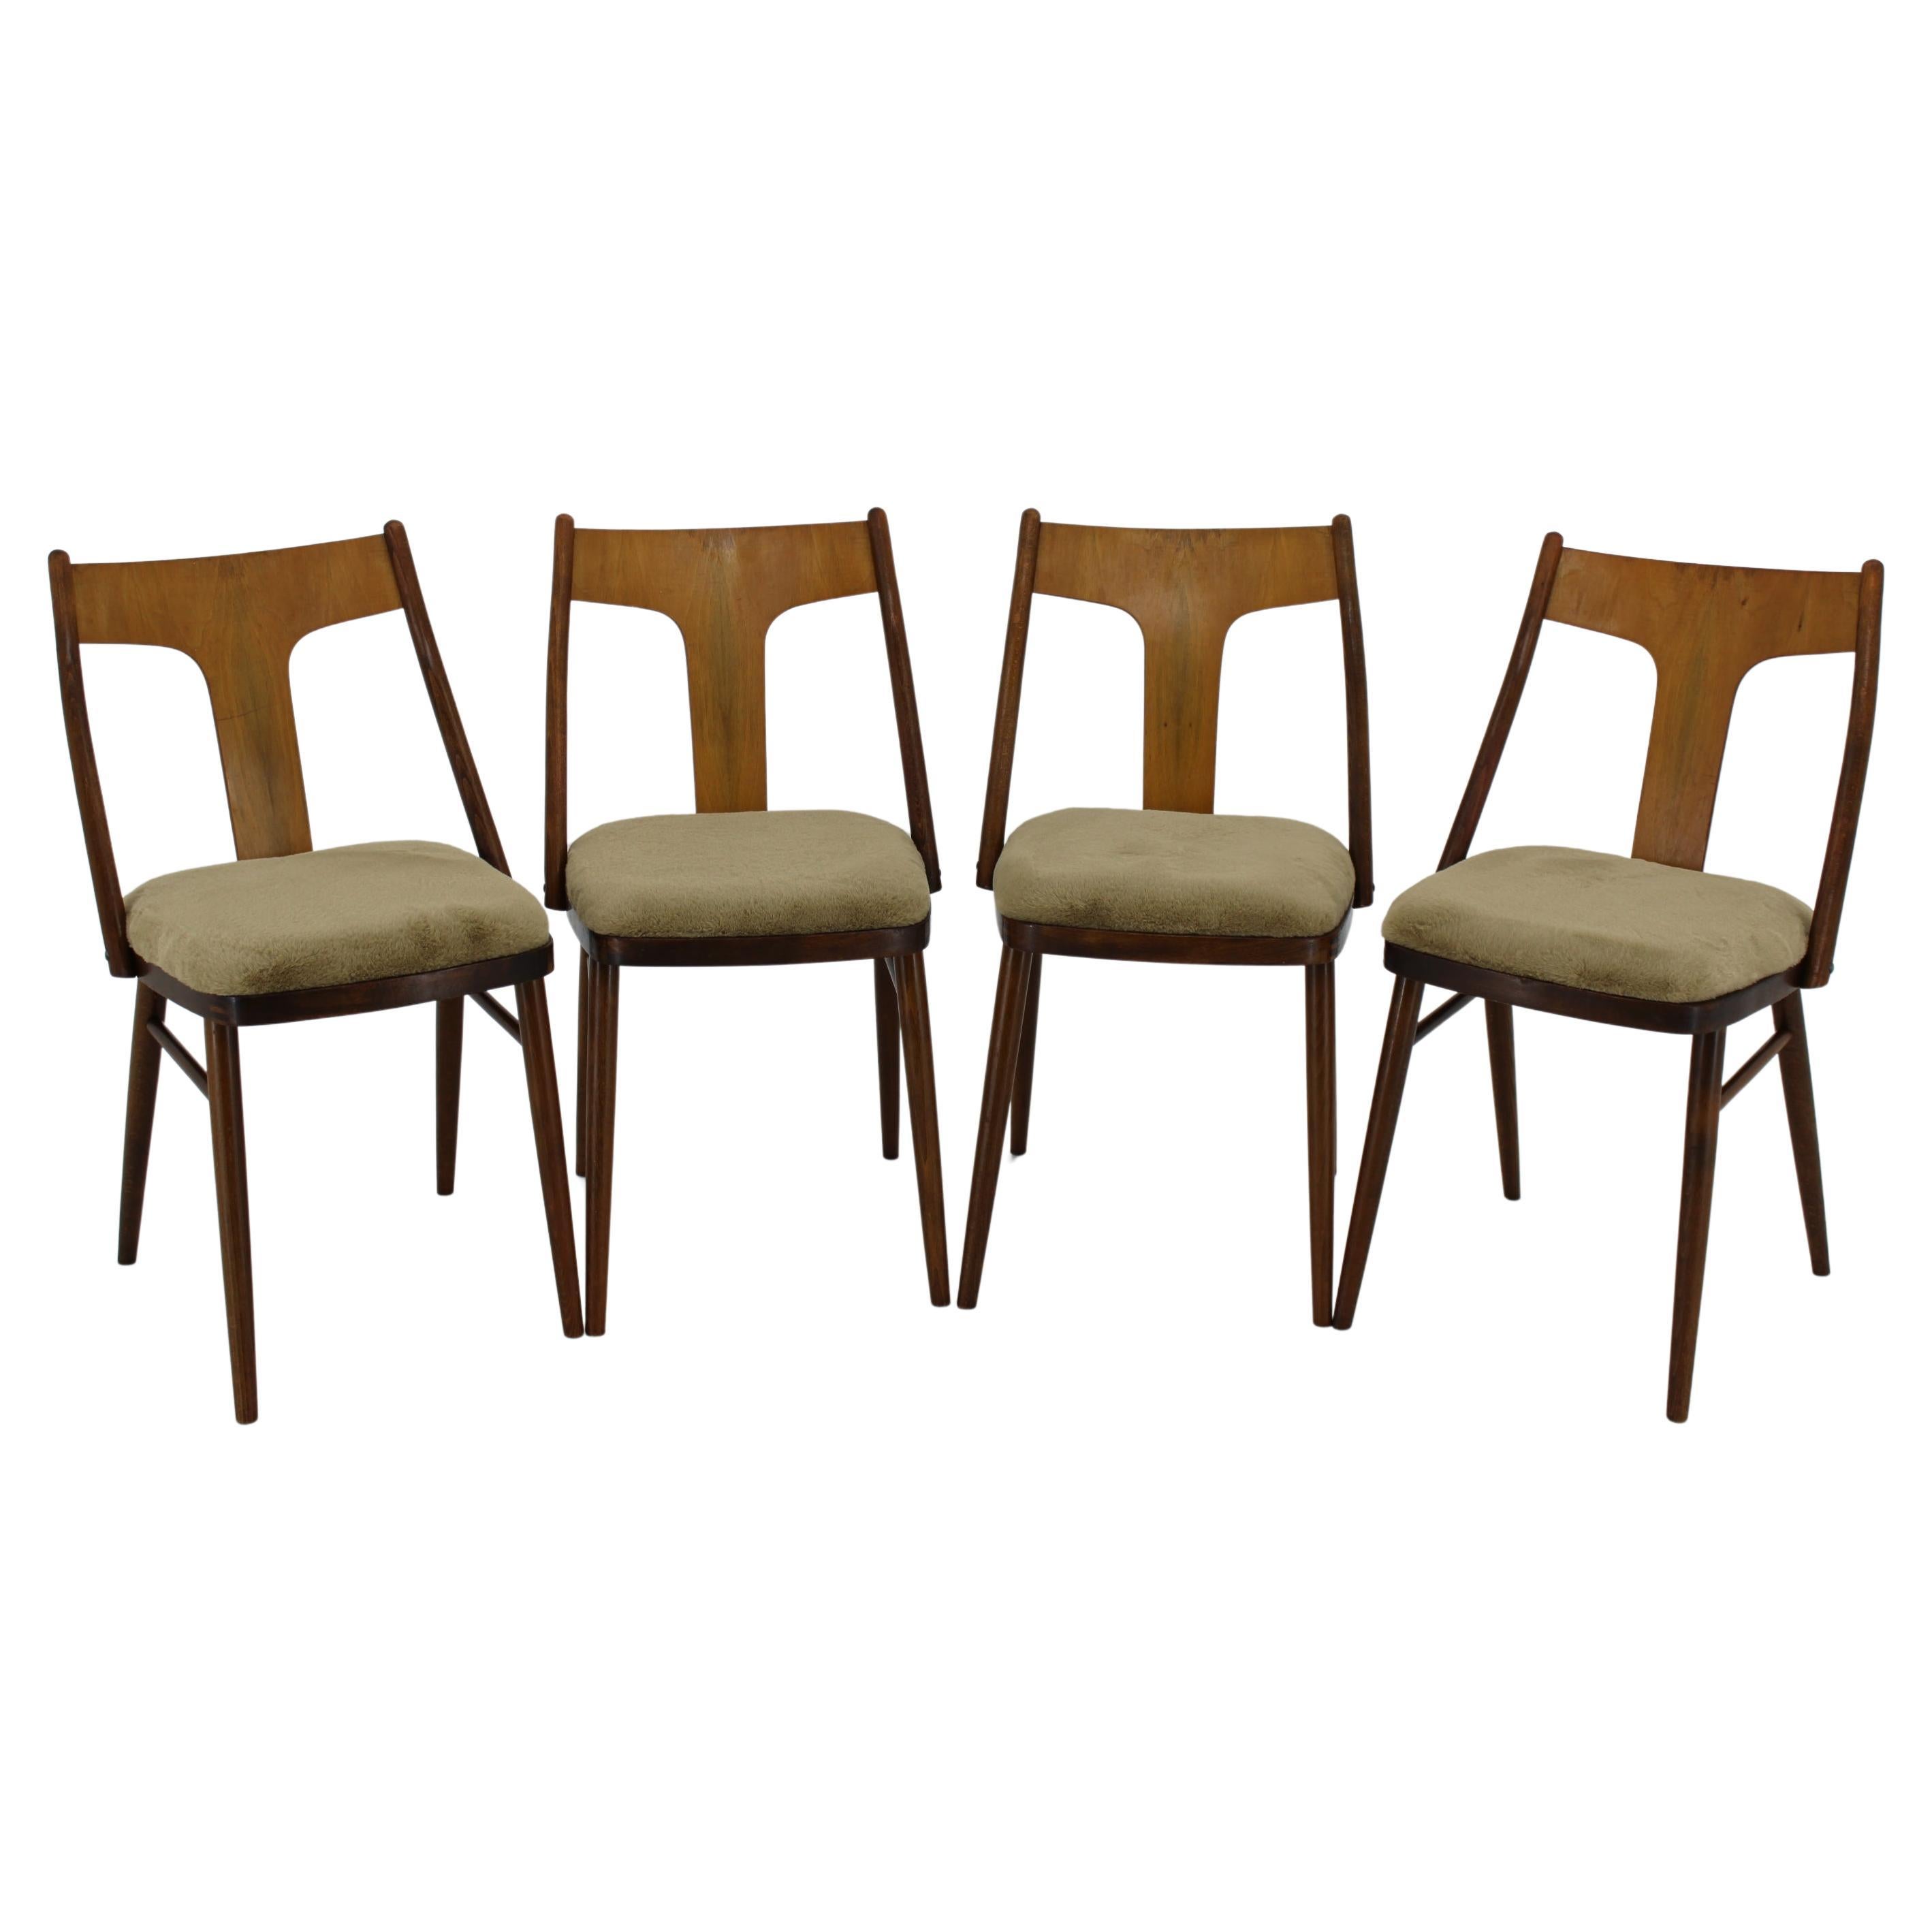 1950s Set of Four Restored Dining Chairs in Walnut, Czechoslovakia